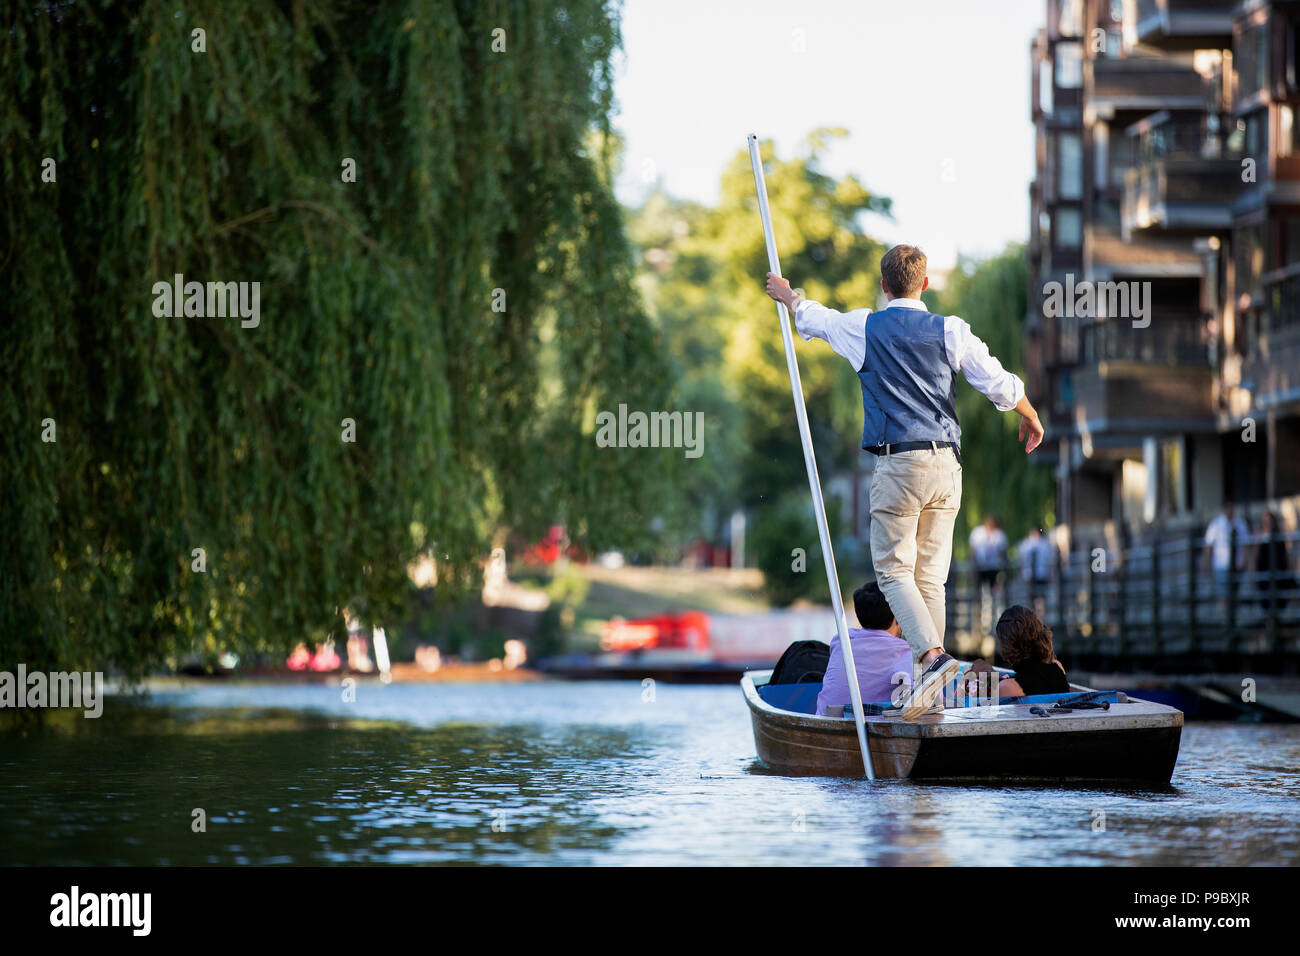 A Punt chauffeur makes their way up the River Cam in Cambridge England. Stock Photo